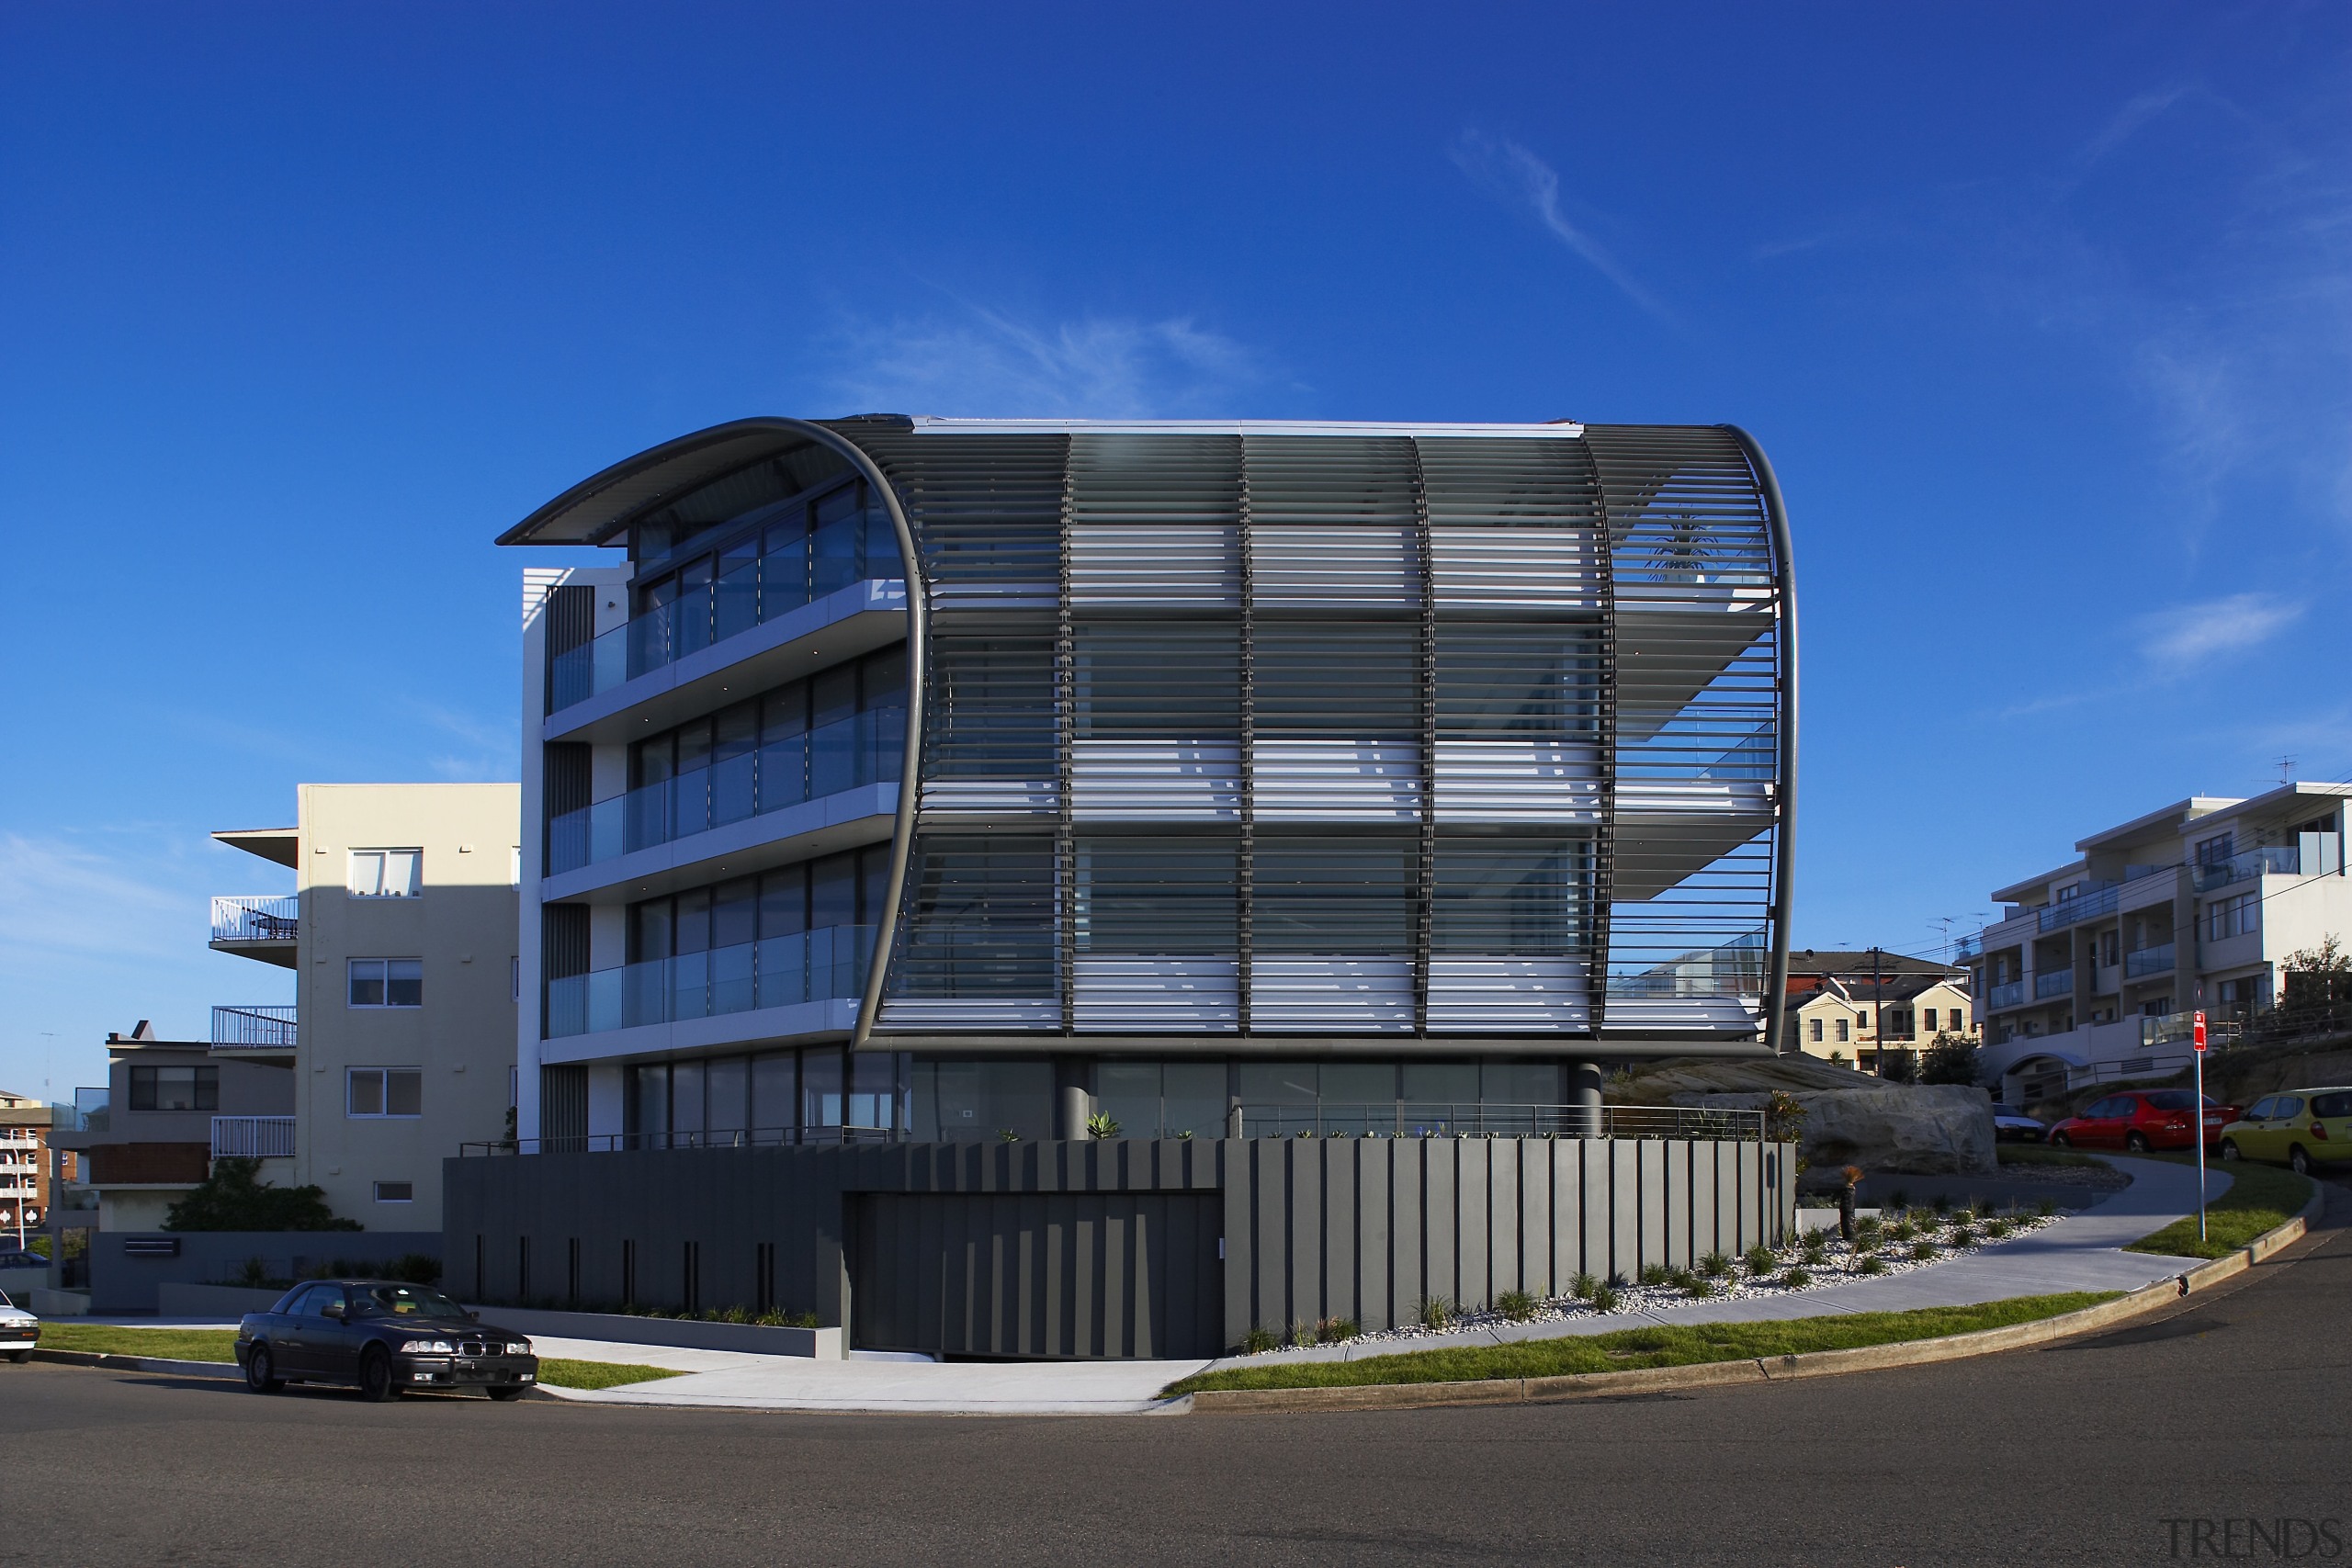 Exterior view of a Sydney apartment building which apartment, architecture, building, city, commercial building, condominium, corporate headquarters, daytime, facade, headquarters, home, house, metropolitan area, mixed use, neighbourhood, real estate, residential area, sky, window, blue, black